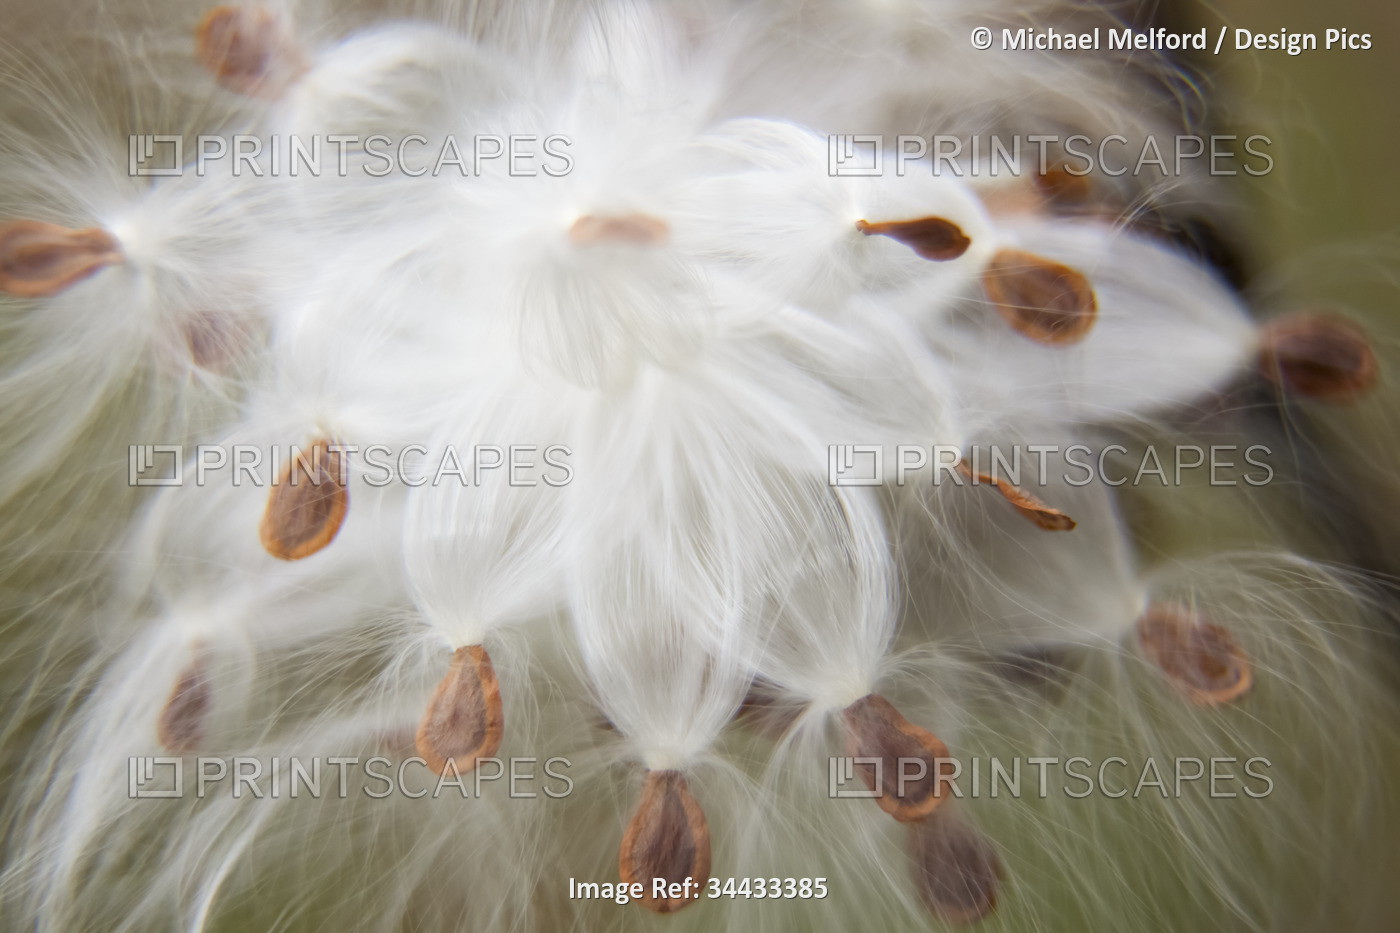 Milkweed (Asclepias) seeds leaving their pod; New York, United States of America